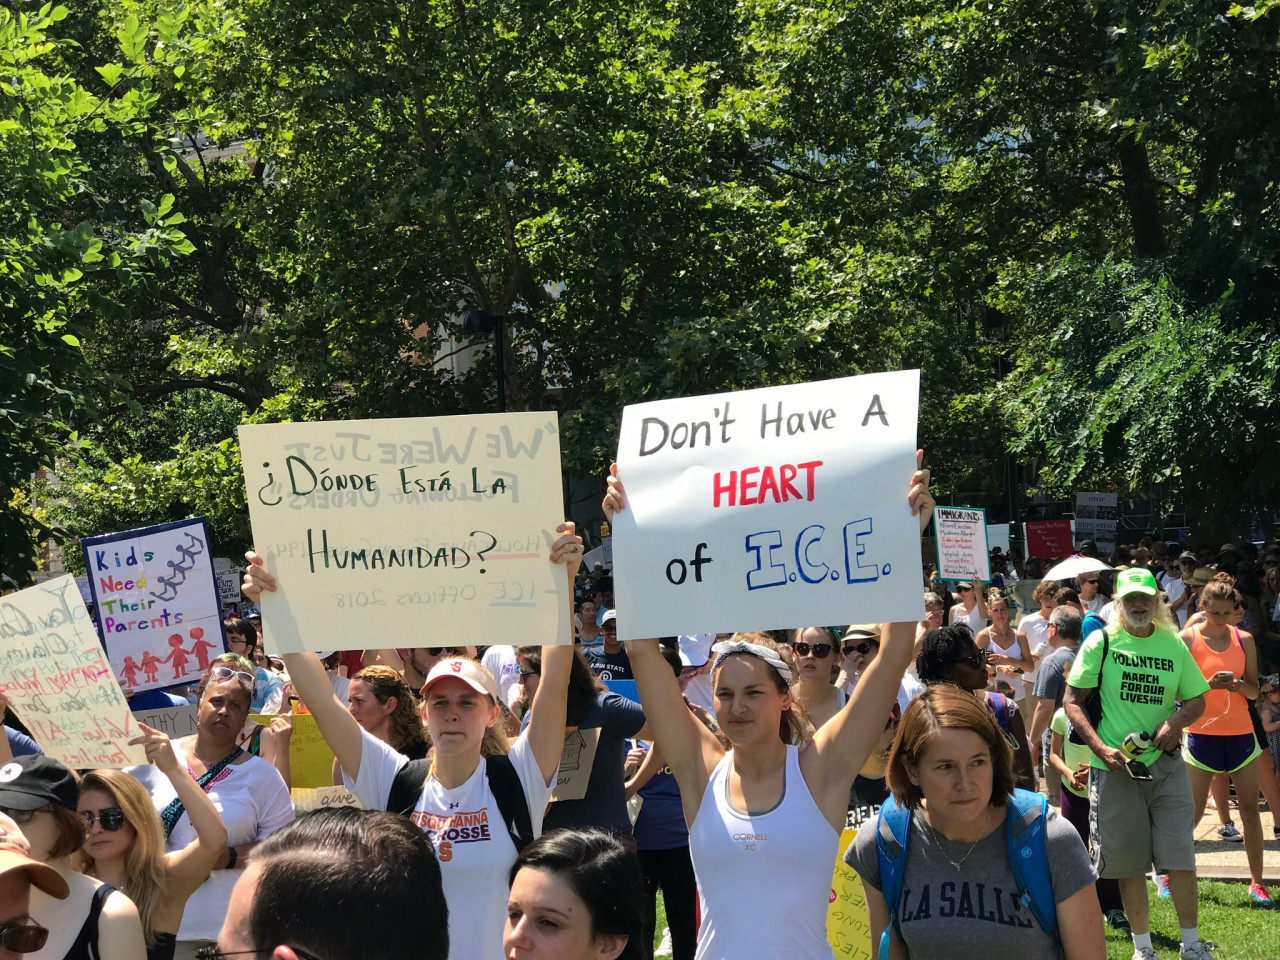 <a class="bx-tag" rel="tag" href="https://wethepeople.care/page/view-channel-profile?id=722"><s>#</s><b>familiesbelongtogether</b></a> - Don't Have a Heart of ICE